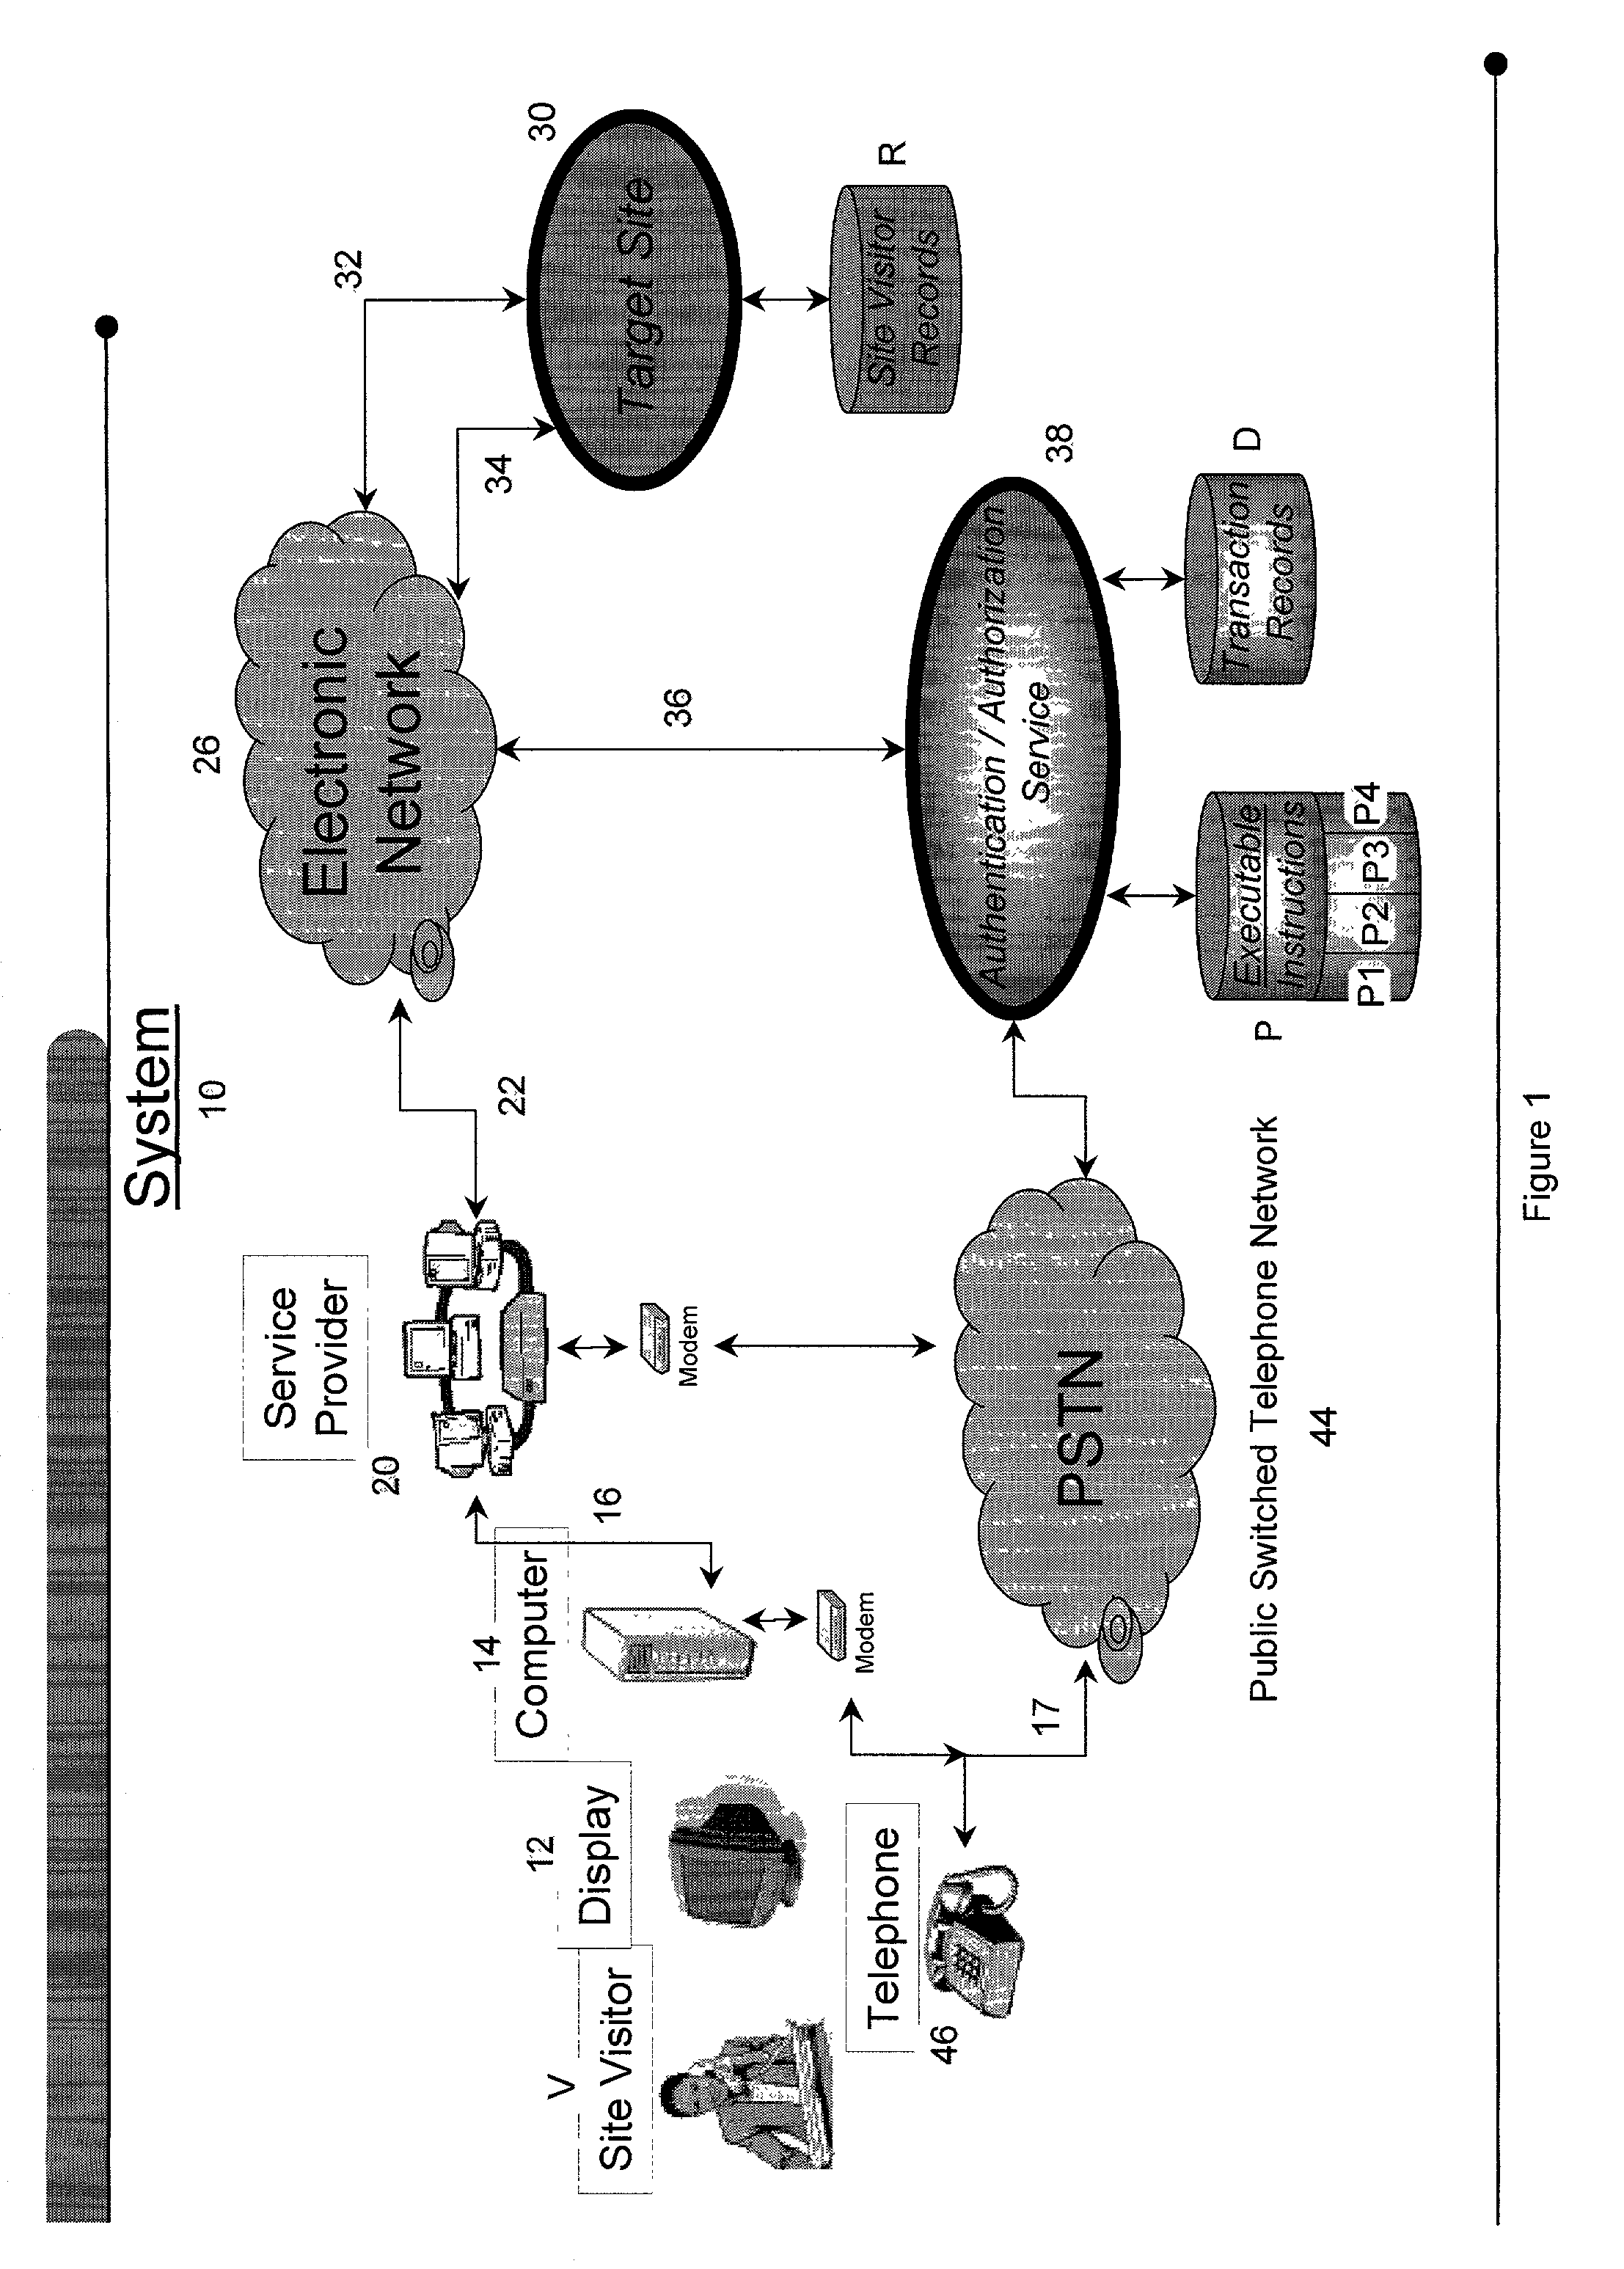 Use of public switched telephone network for authentication and authorization in on-line transactions